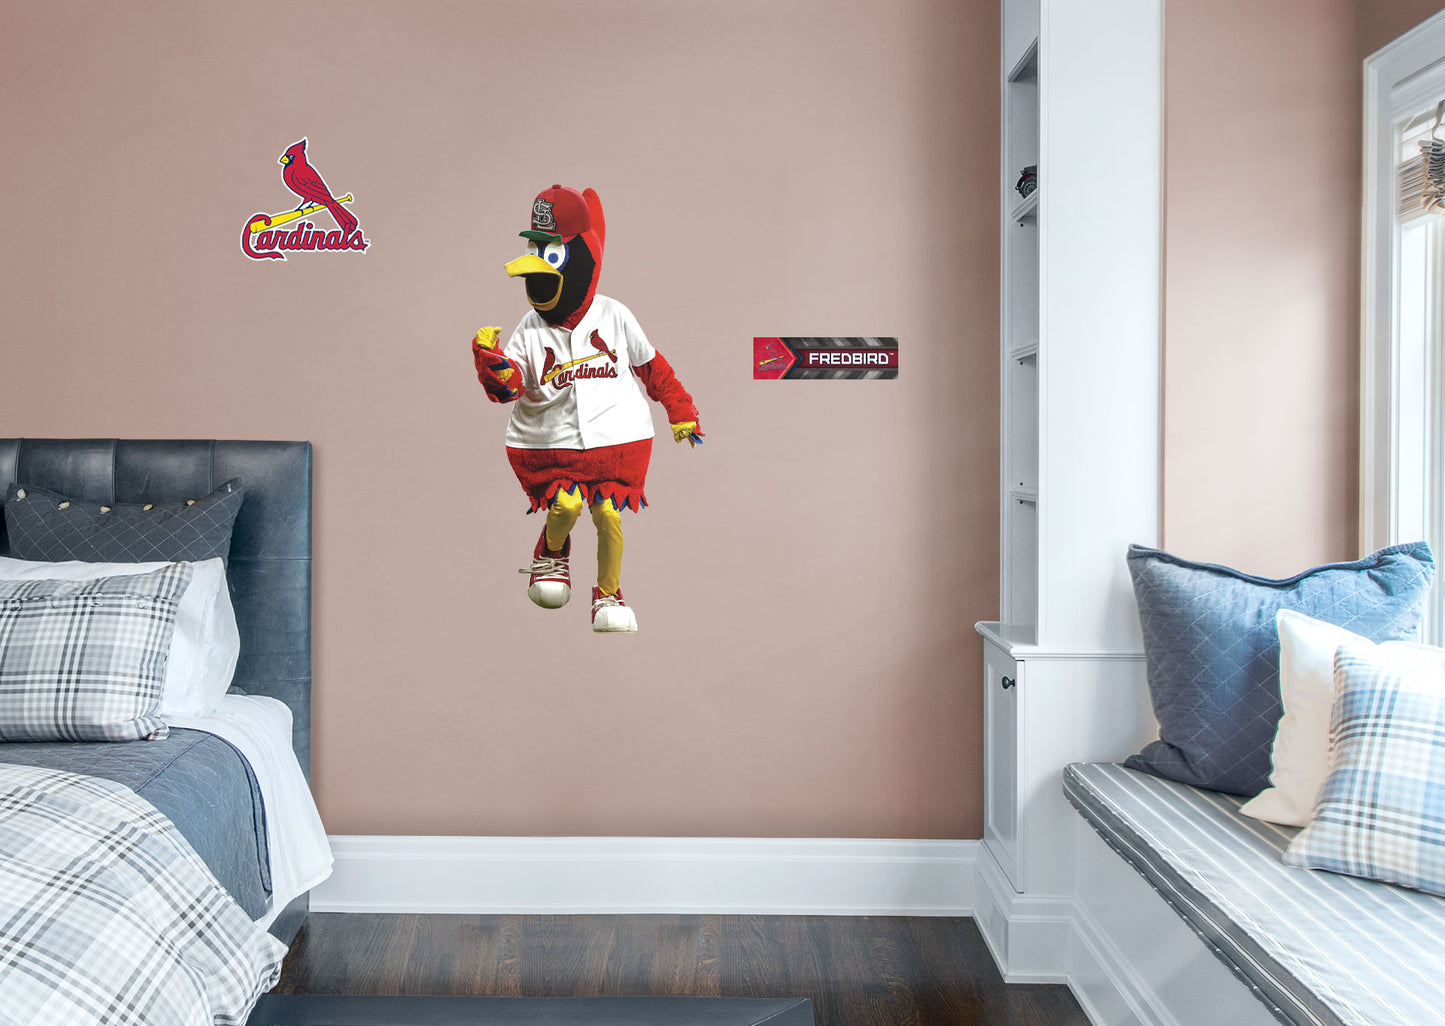 St. Louis Cardinals for St Louis Cardinals: Fredbird 2021 Mascot - MLB Removable Wall Adhesive Wall Decal Giant Athlete +2 Wall Decals 26'W x 51'H